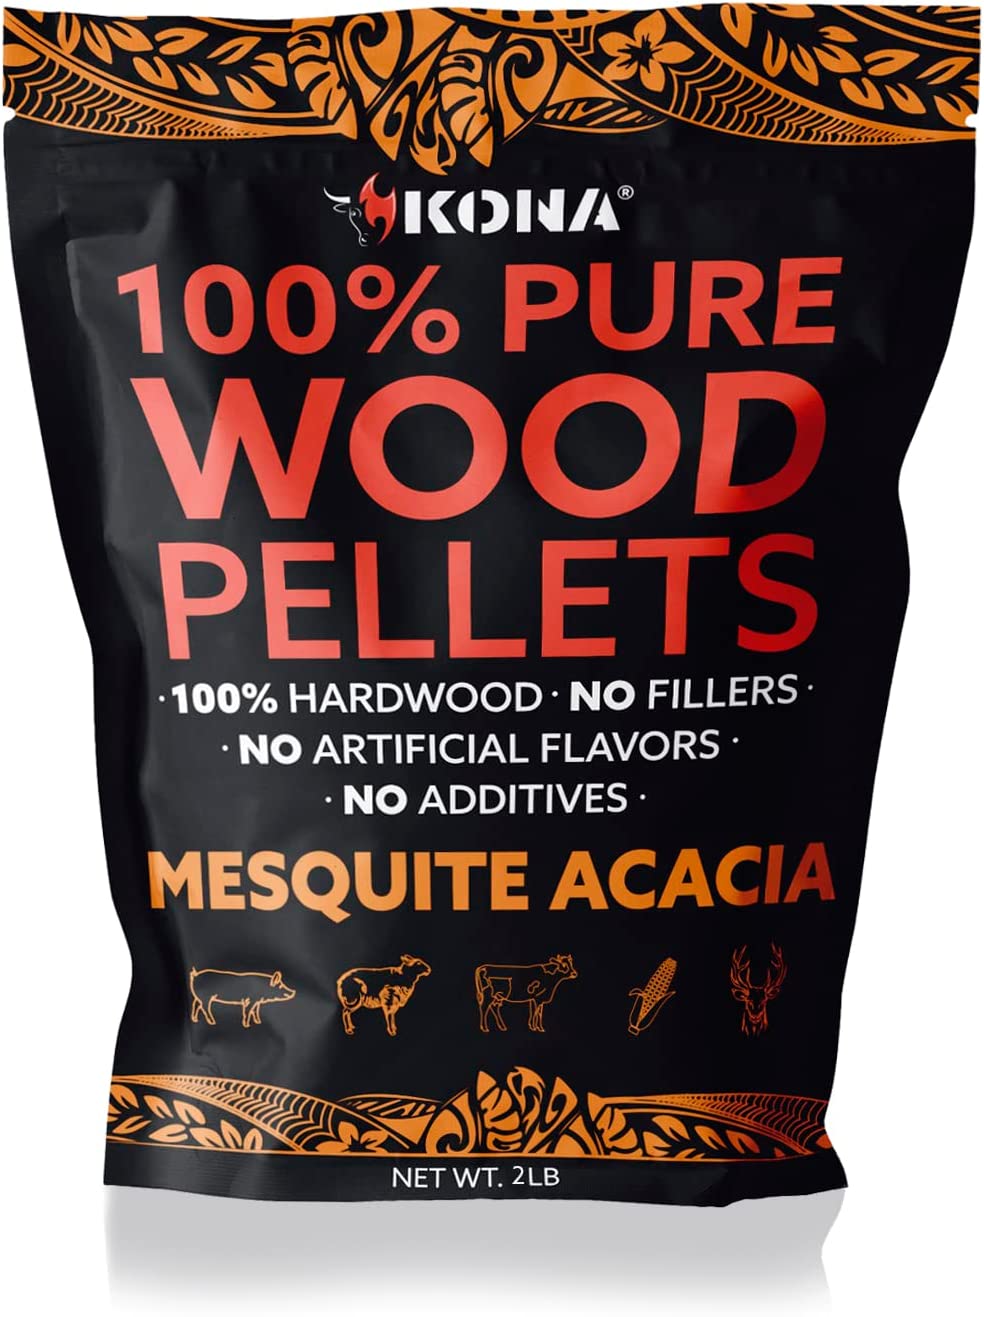 Kona 100% Mesquite Acacia Wood Pellets - Grilling, BBQ & Smoking - Concentrated Pure Hardwood - Bold Smoke - The Tool Store